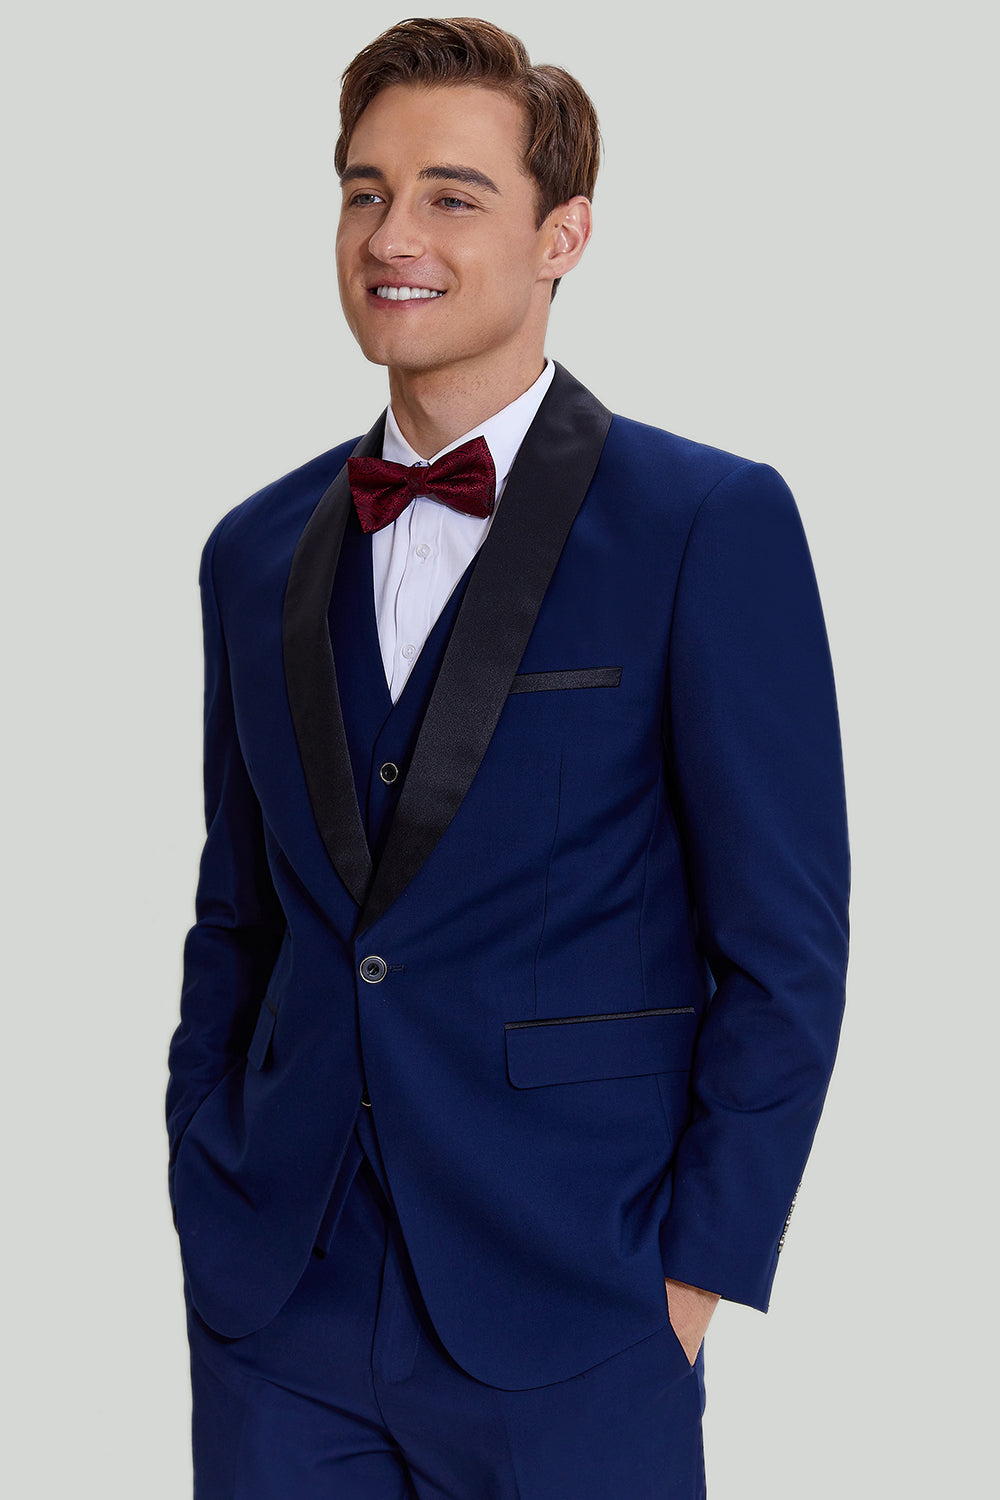 Men's Navy 3-piece One Button Slim Fit Ball Suits